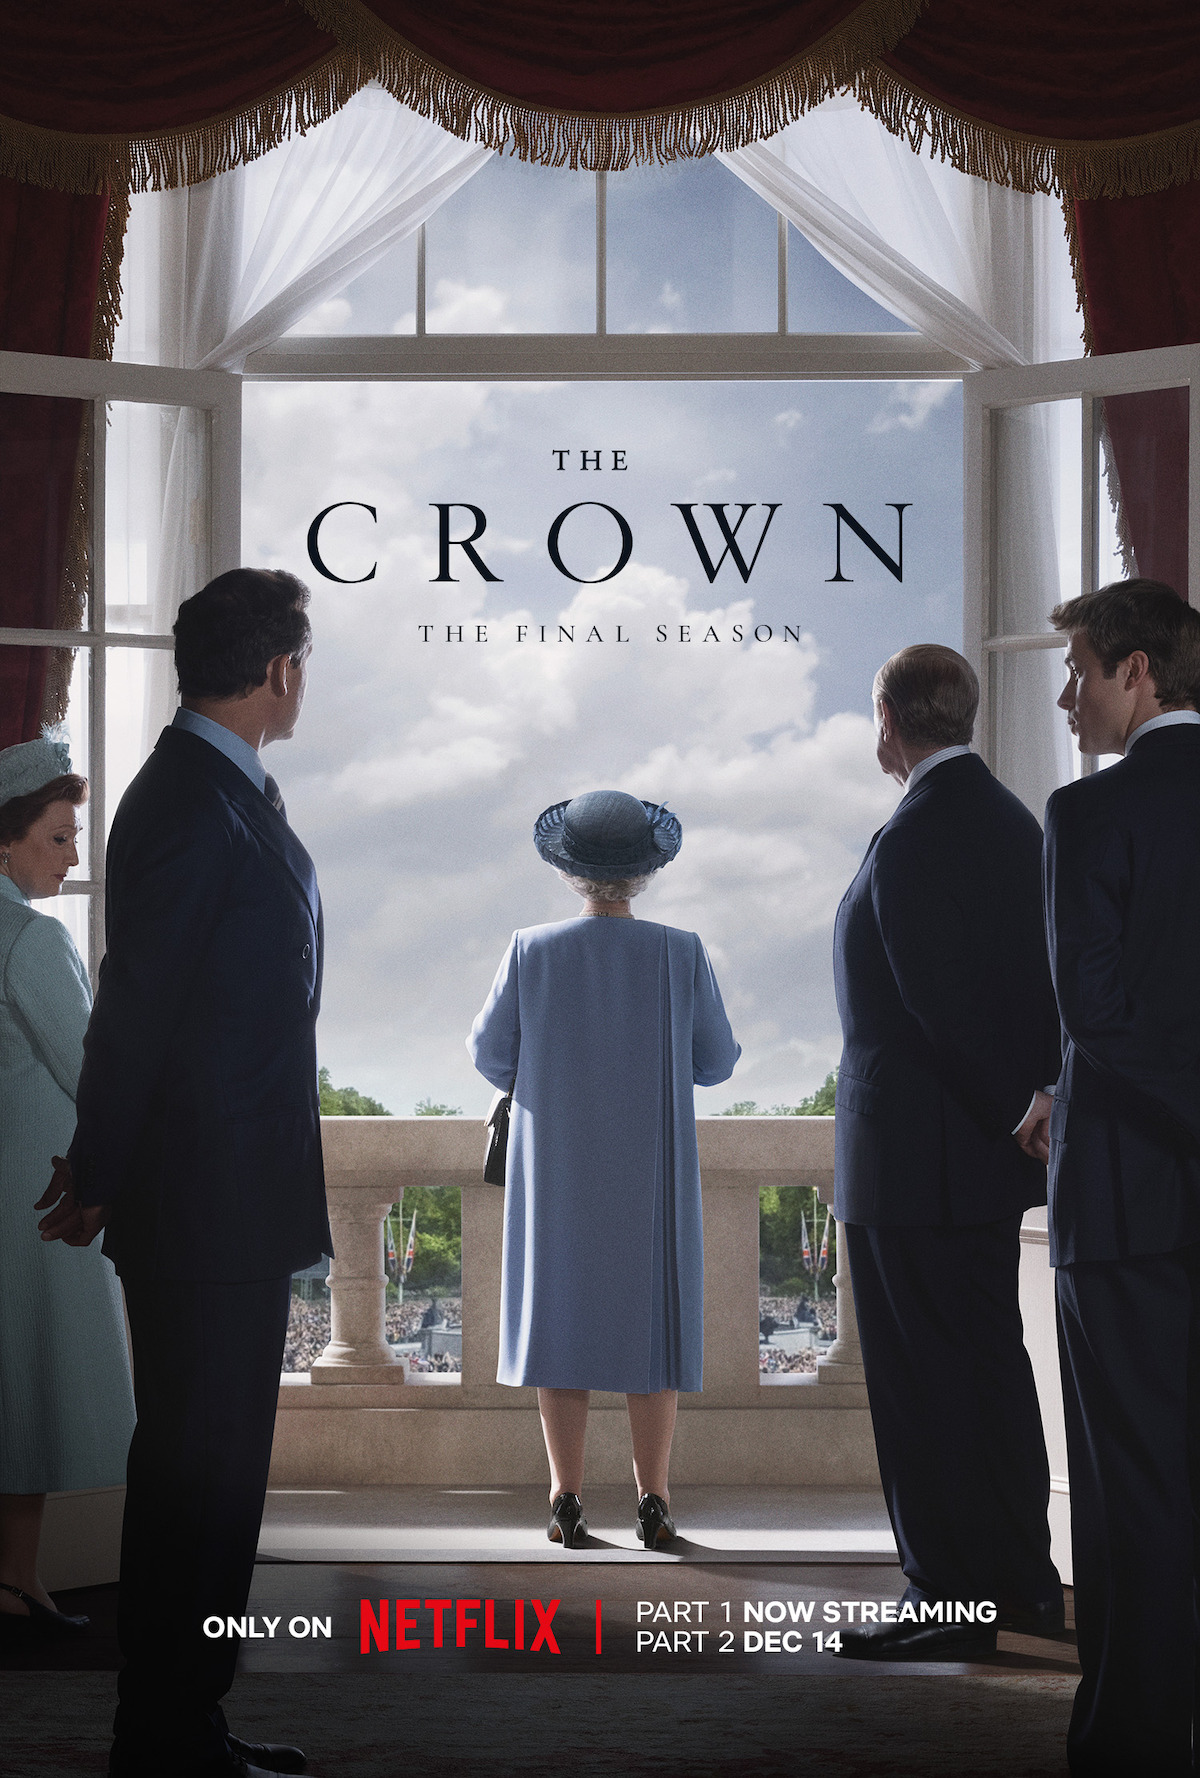 The Crown Season 6 on Netflix: Diana's crash, Dodi's dad's yacht, and more.